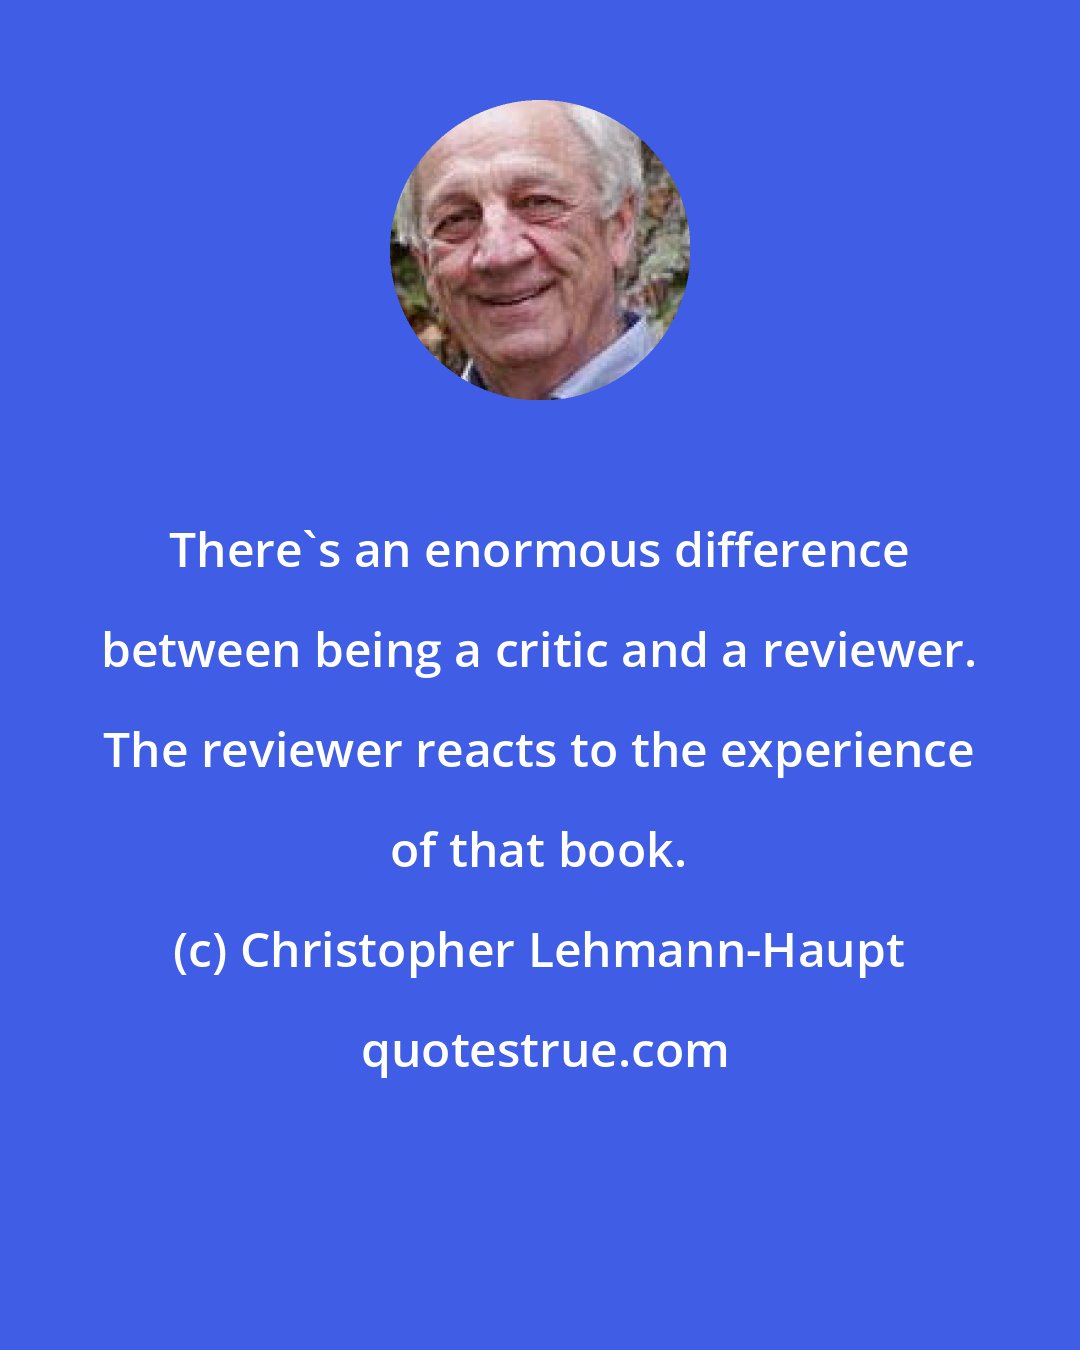 Christopher Lehmann-Haupt: There's an enormous difference between being a critic and a reviewer. The reviewer reacts to the experience of that book.